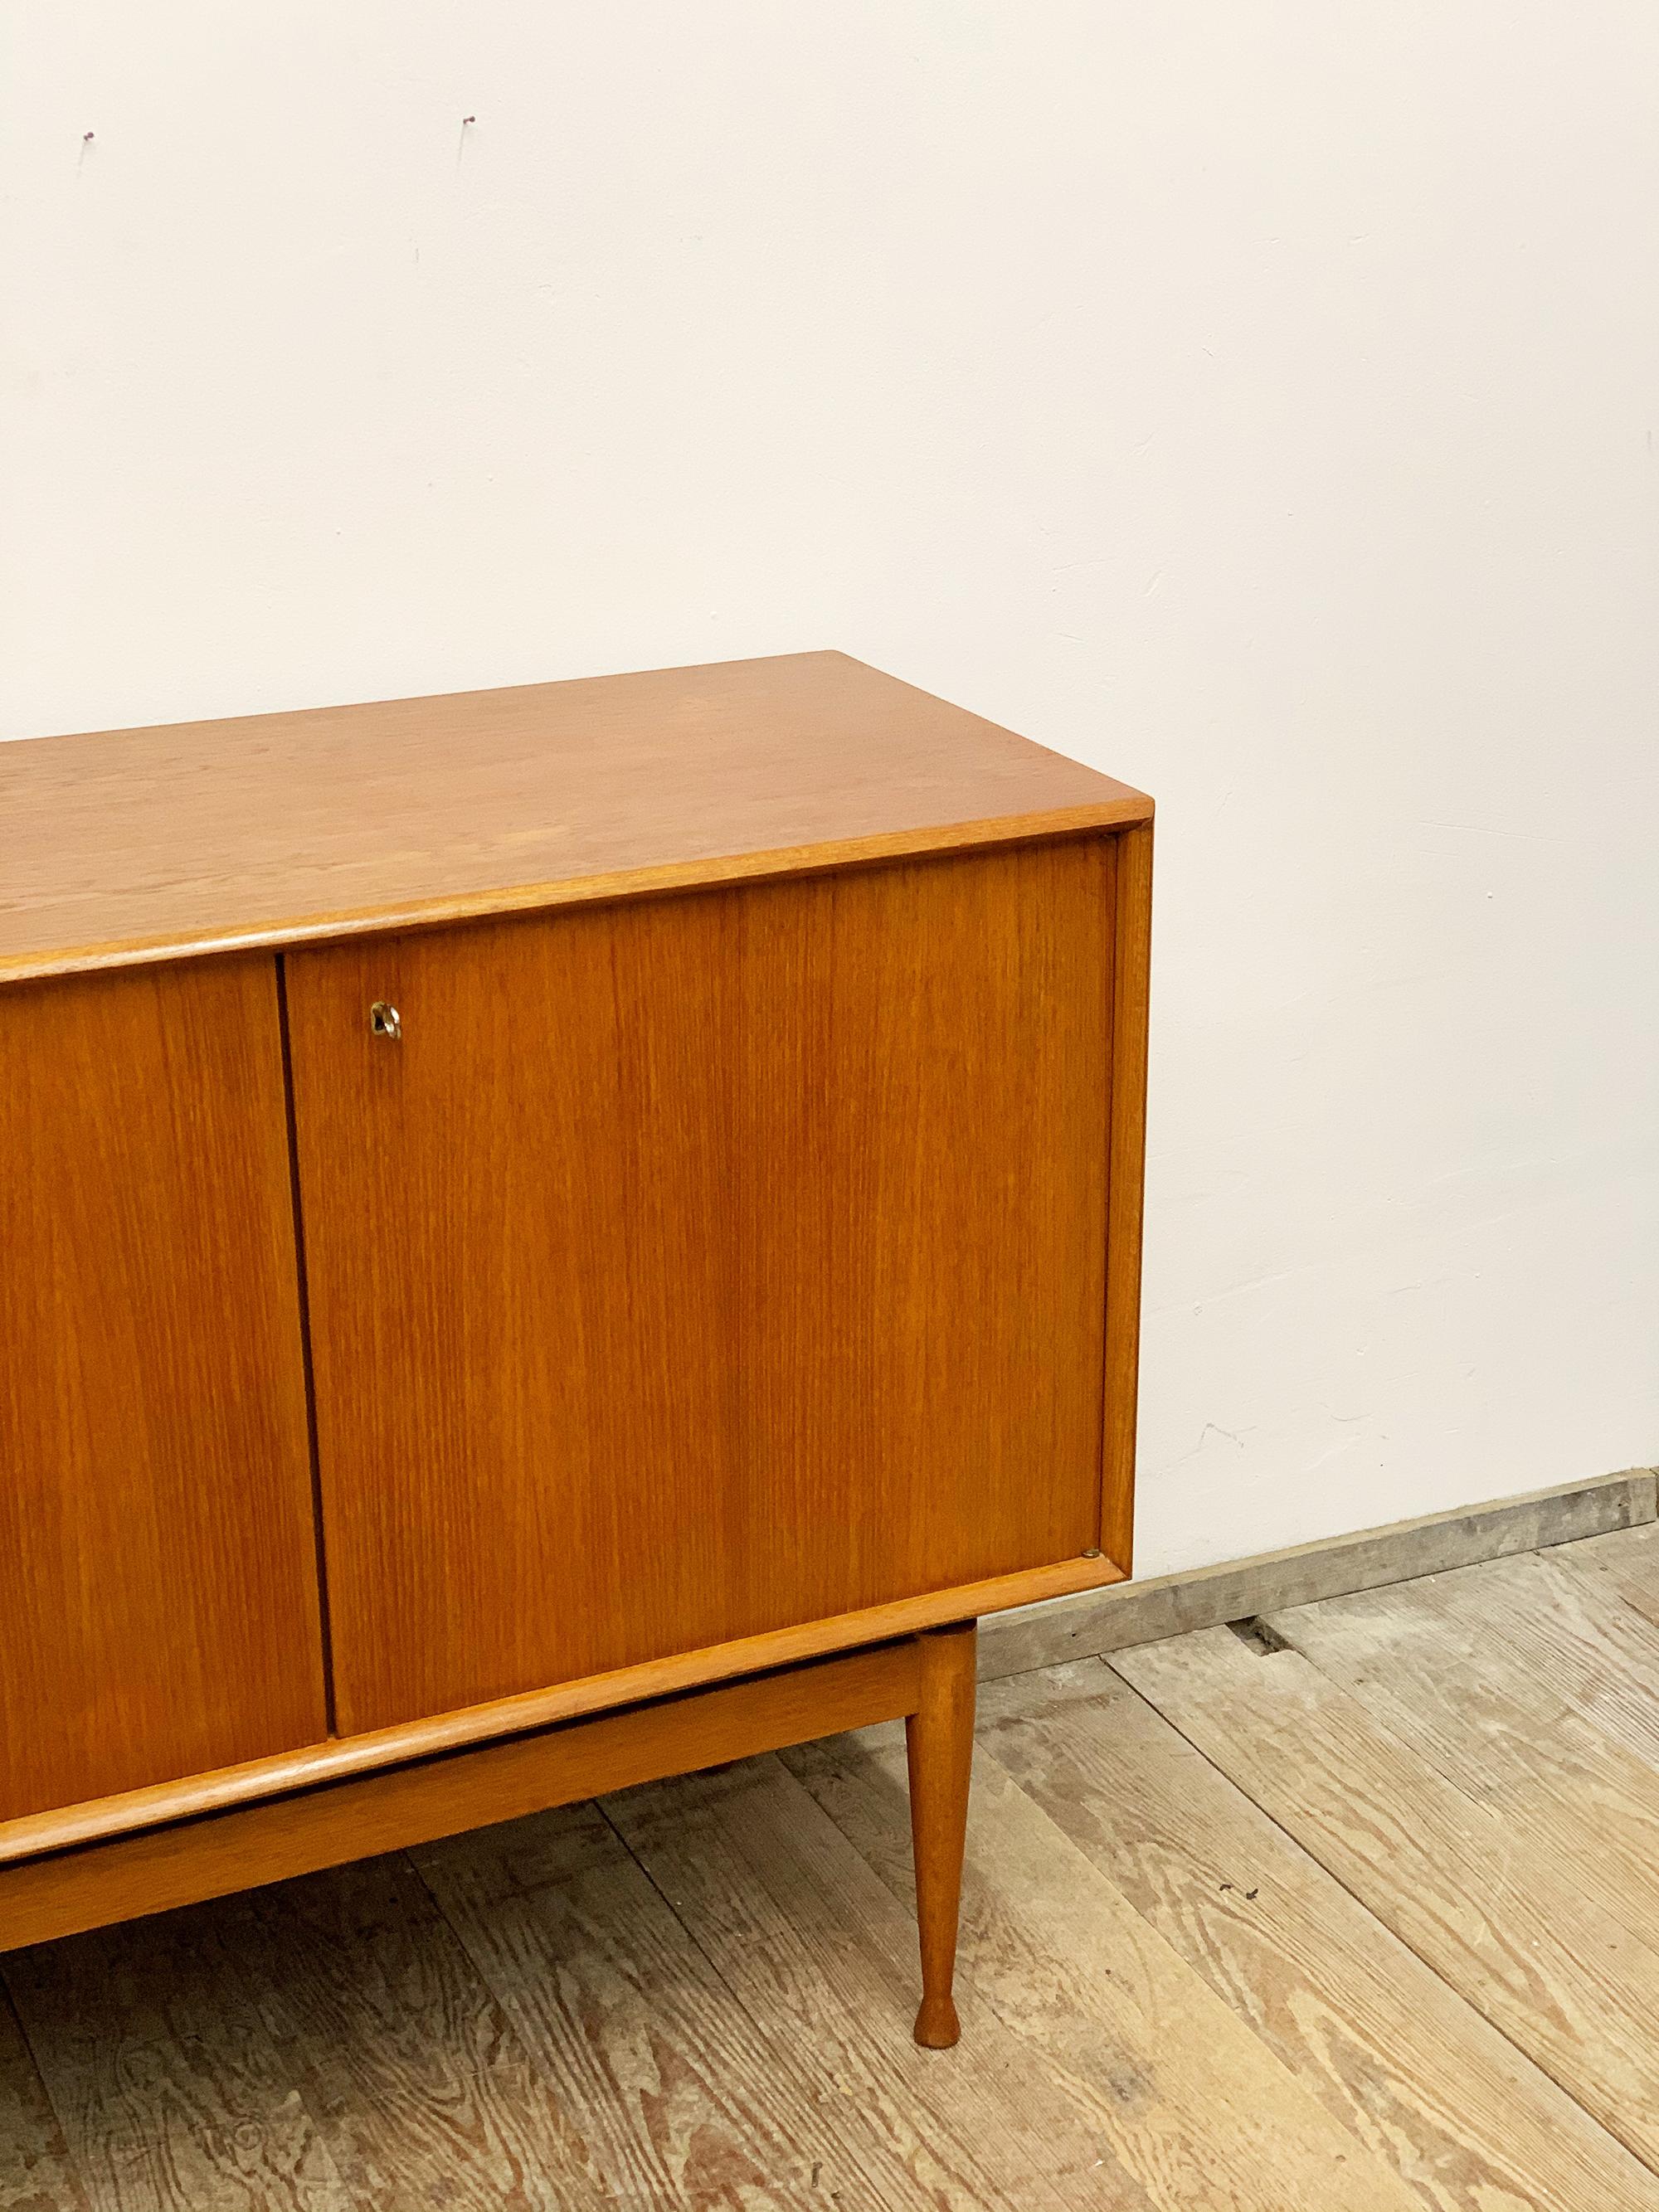 Danish Mid-Century Teak Sideboard or Credenza with Sculpted Legs, Denmark, 1950s 1